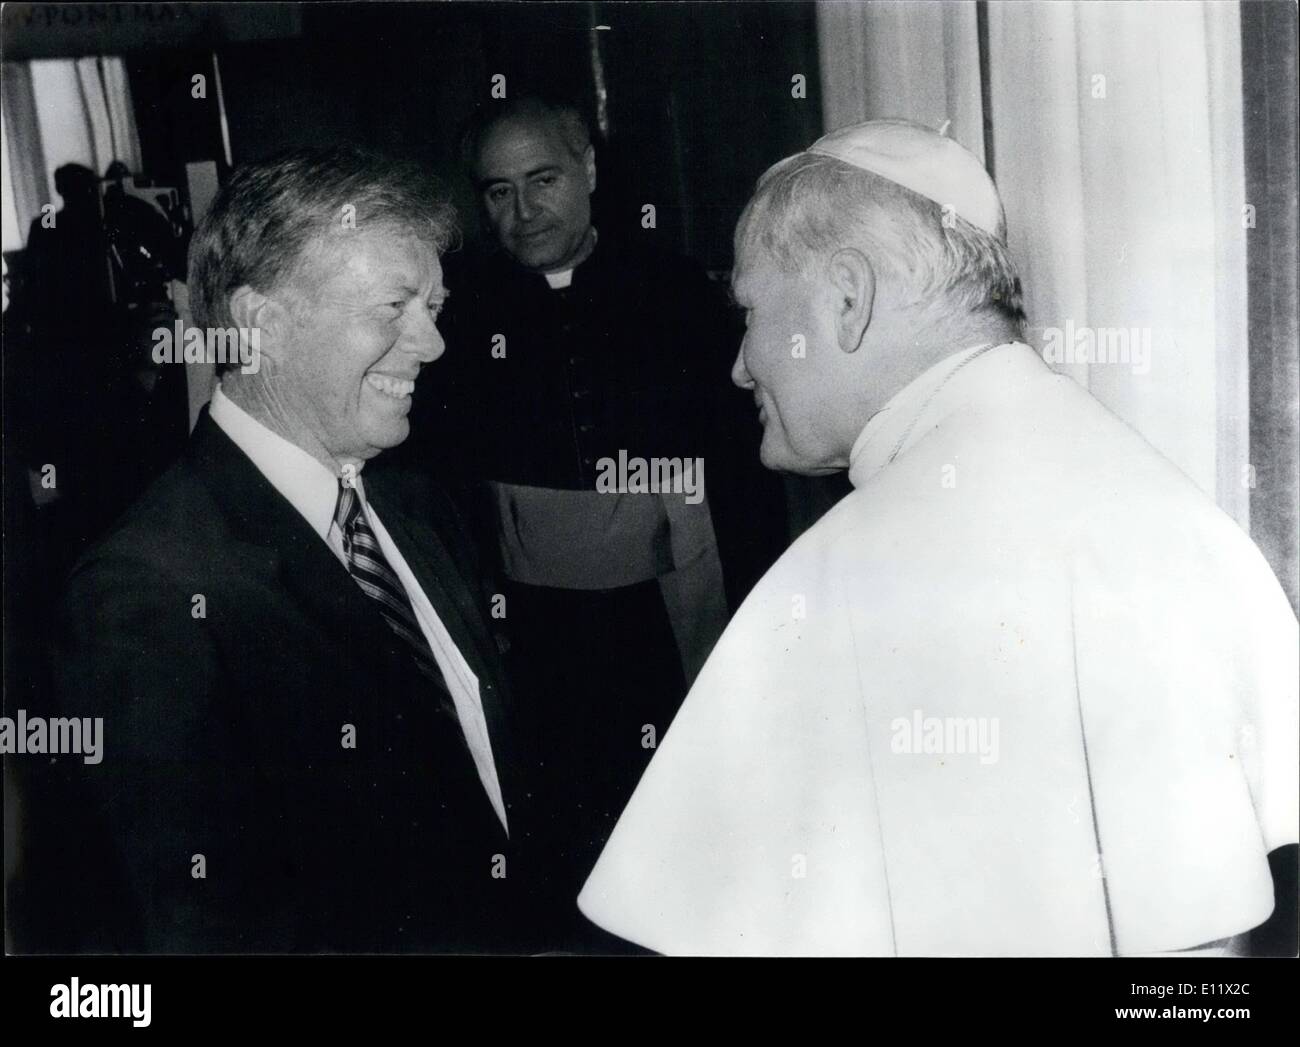 Jun. 06, 1980 - President Carter meets the pope. Photo shows President Carter seen during his meeting with Pope John Paul II in Stock Photo